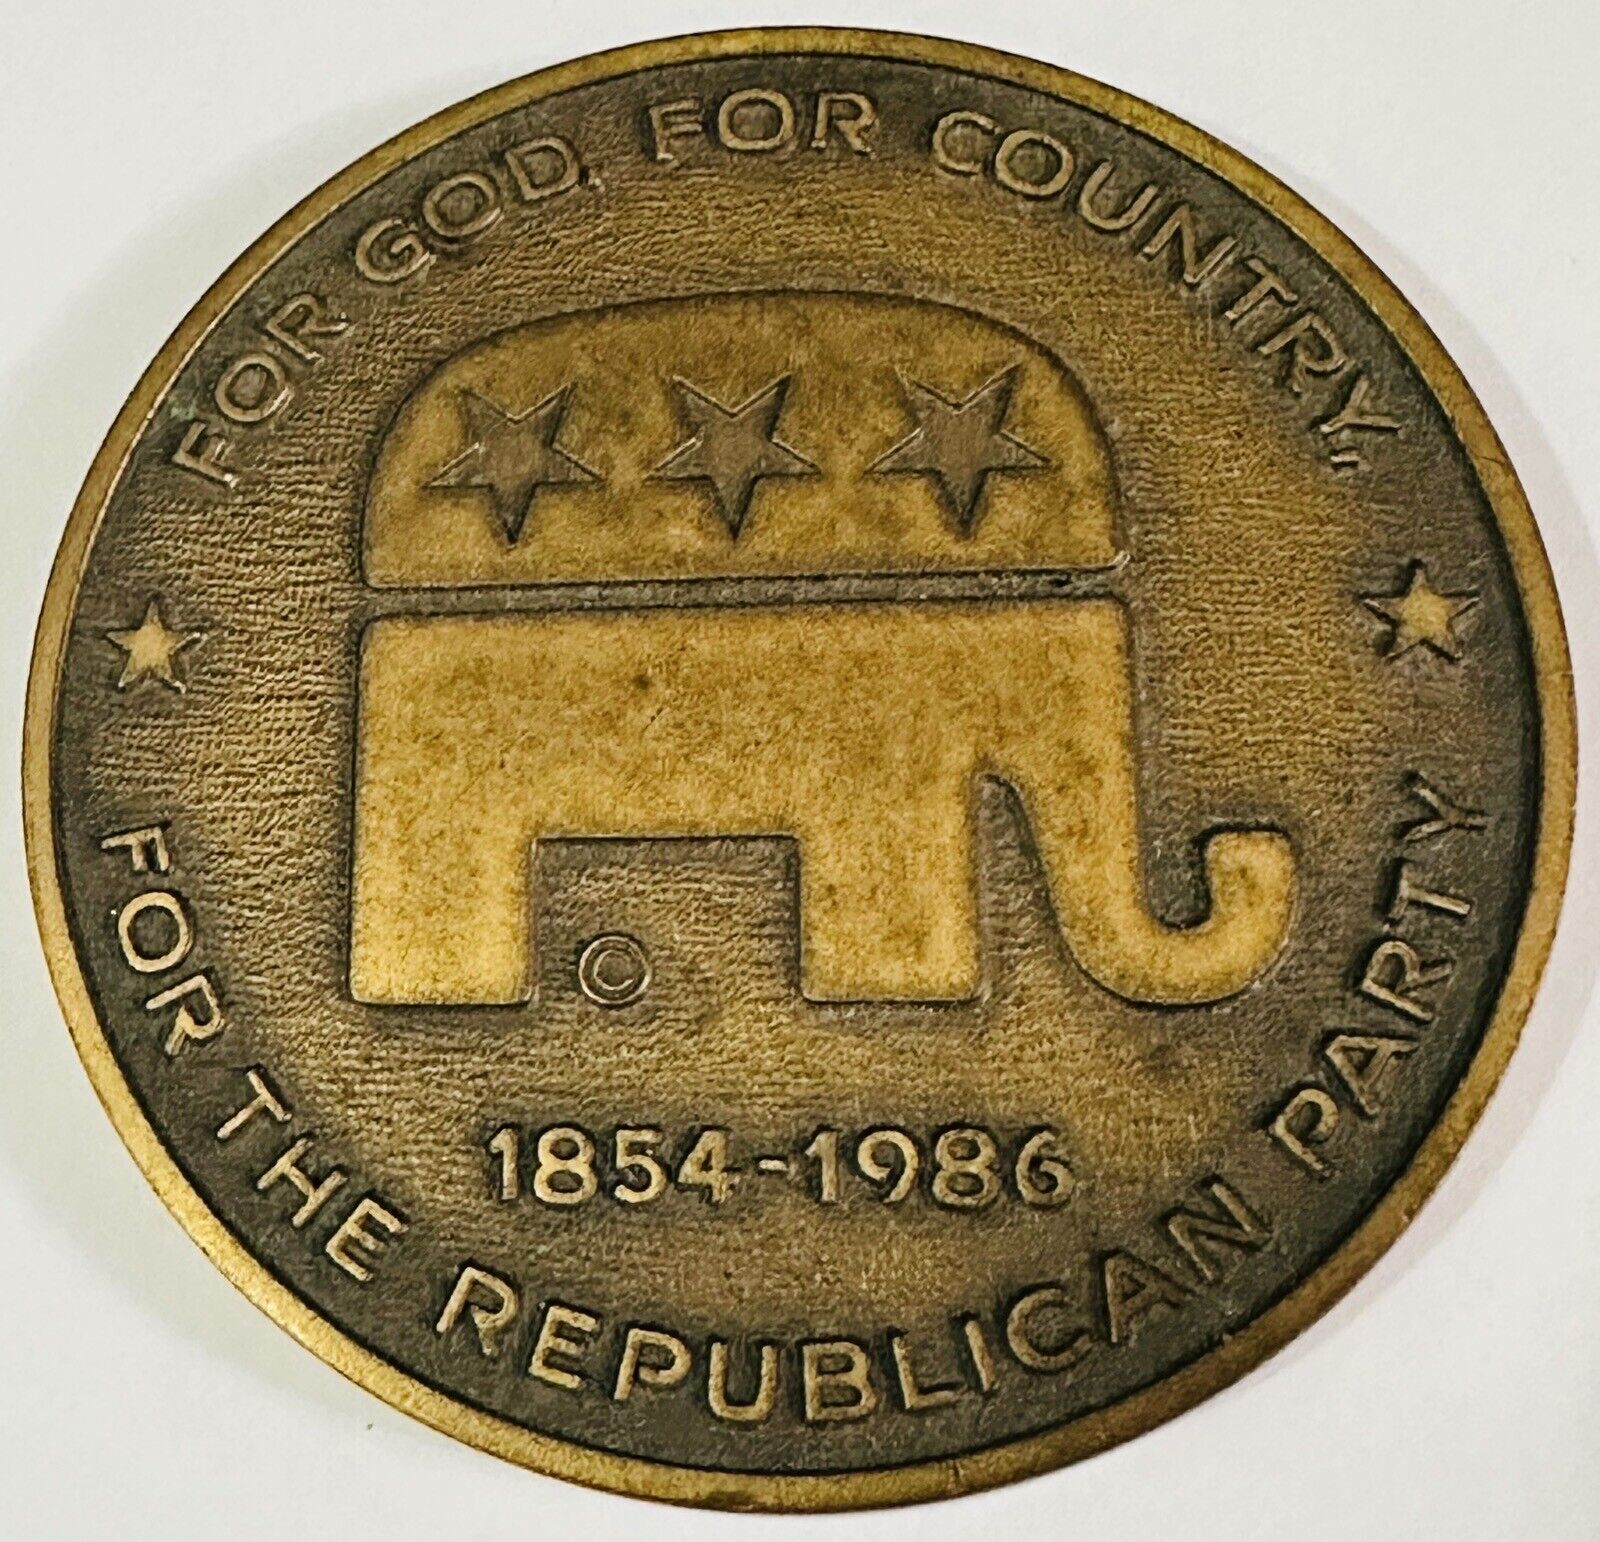 Republican Party Medal 1854-1986 For God For Country, For The Republican Party